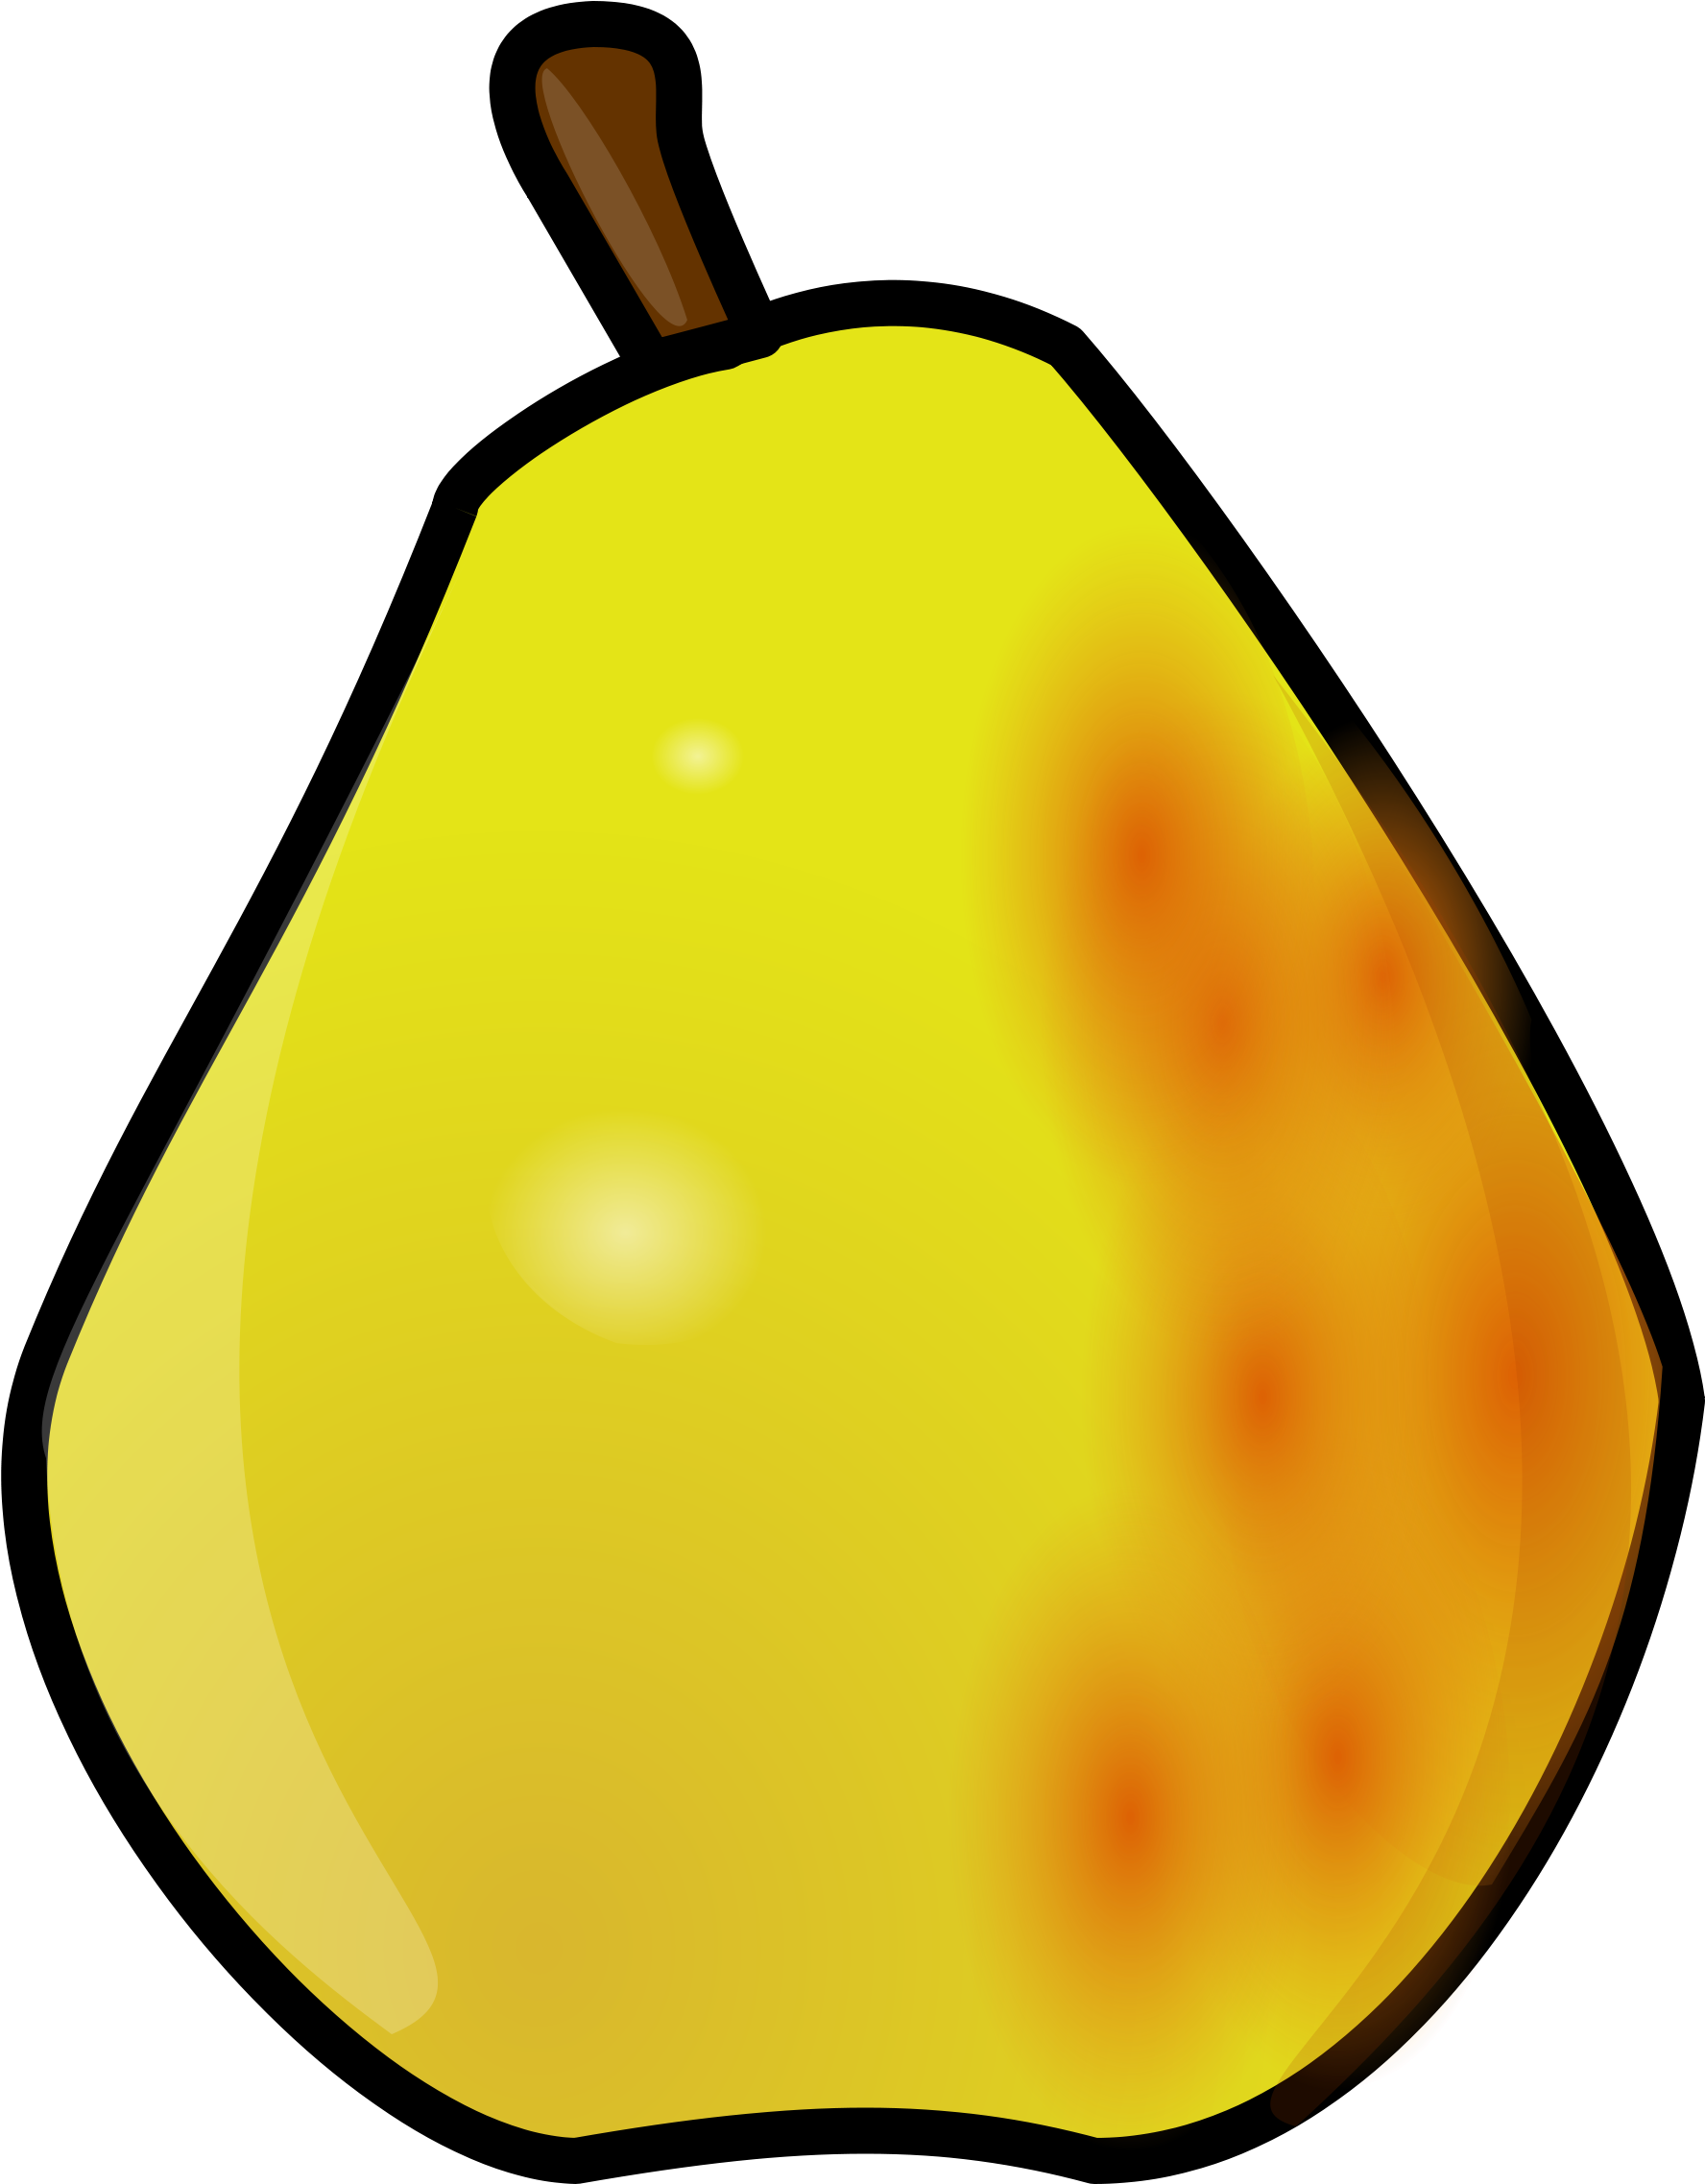 Pear - Pear Clipart Transparent Background (2400x2400)